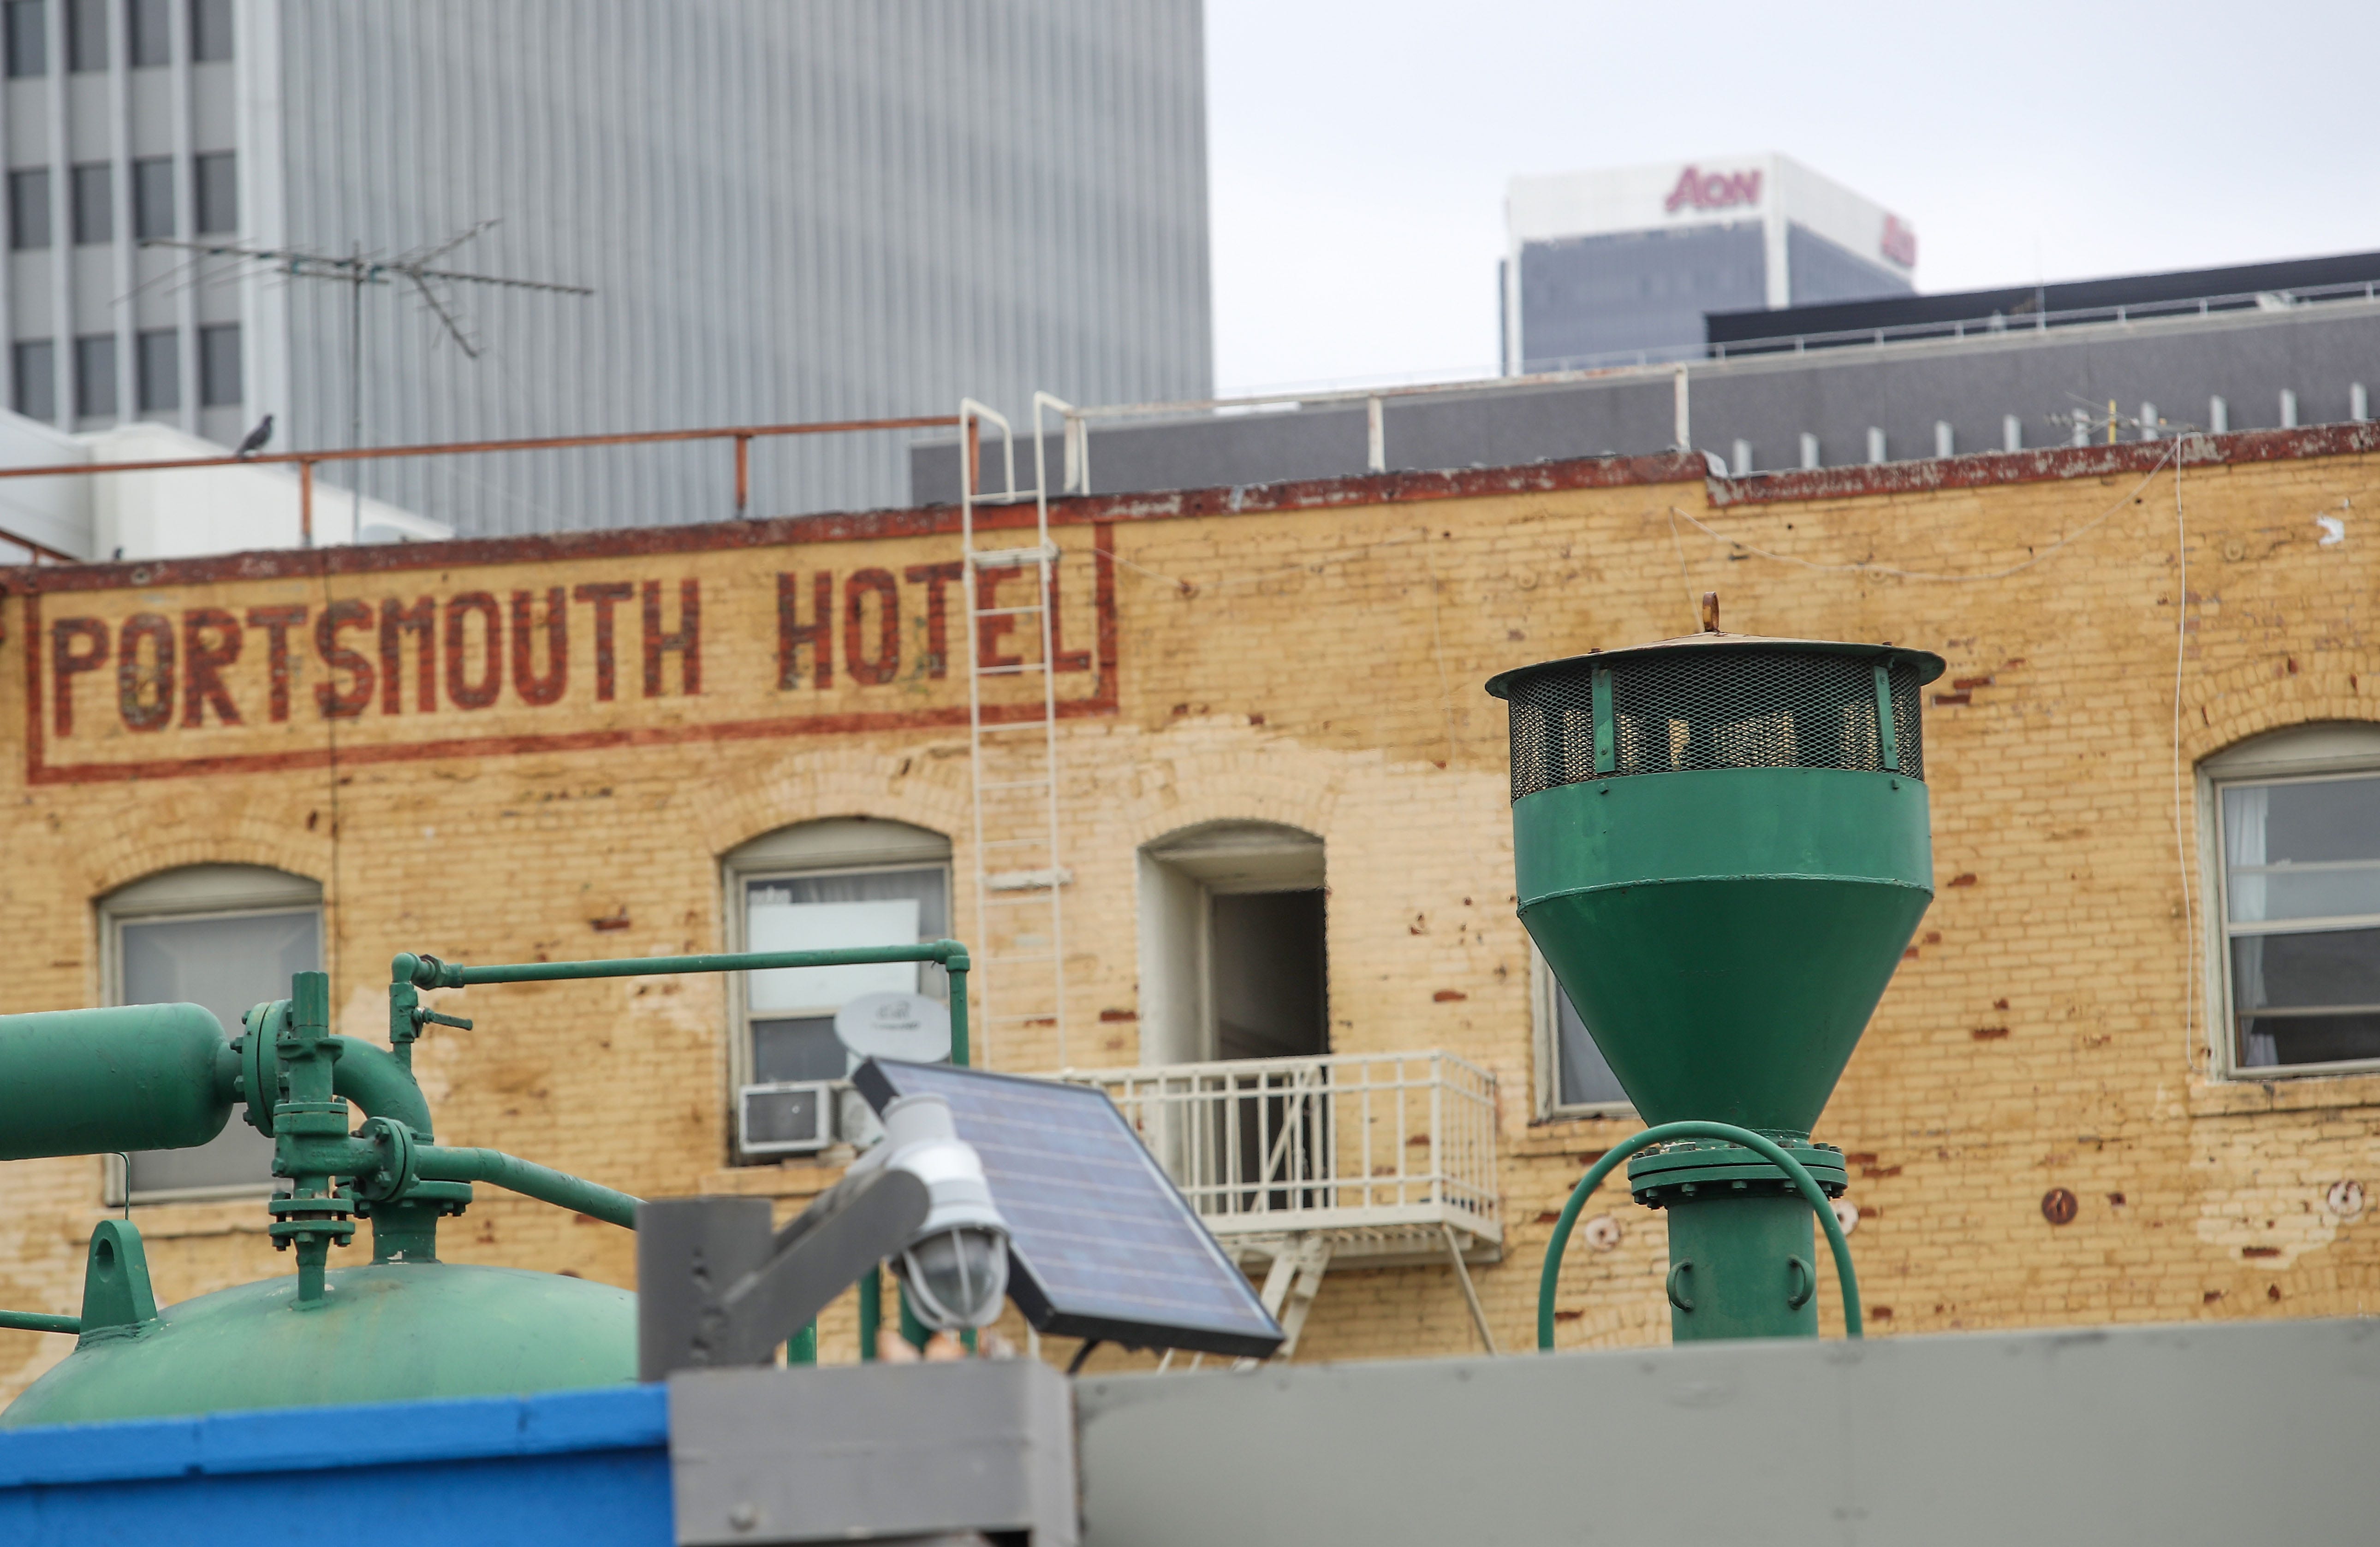 The Portsmouth Hotel, near the Nasco Petroleum site in Los Angeles, Feb. 9, 2021.